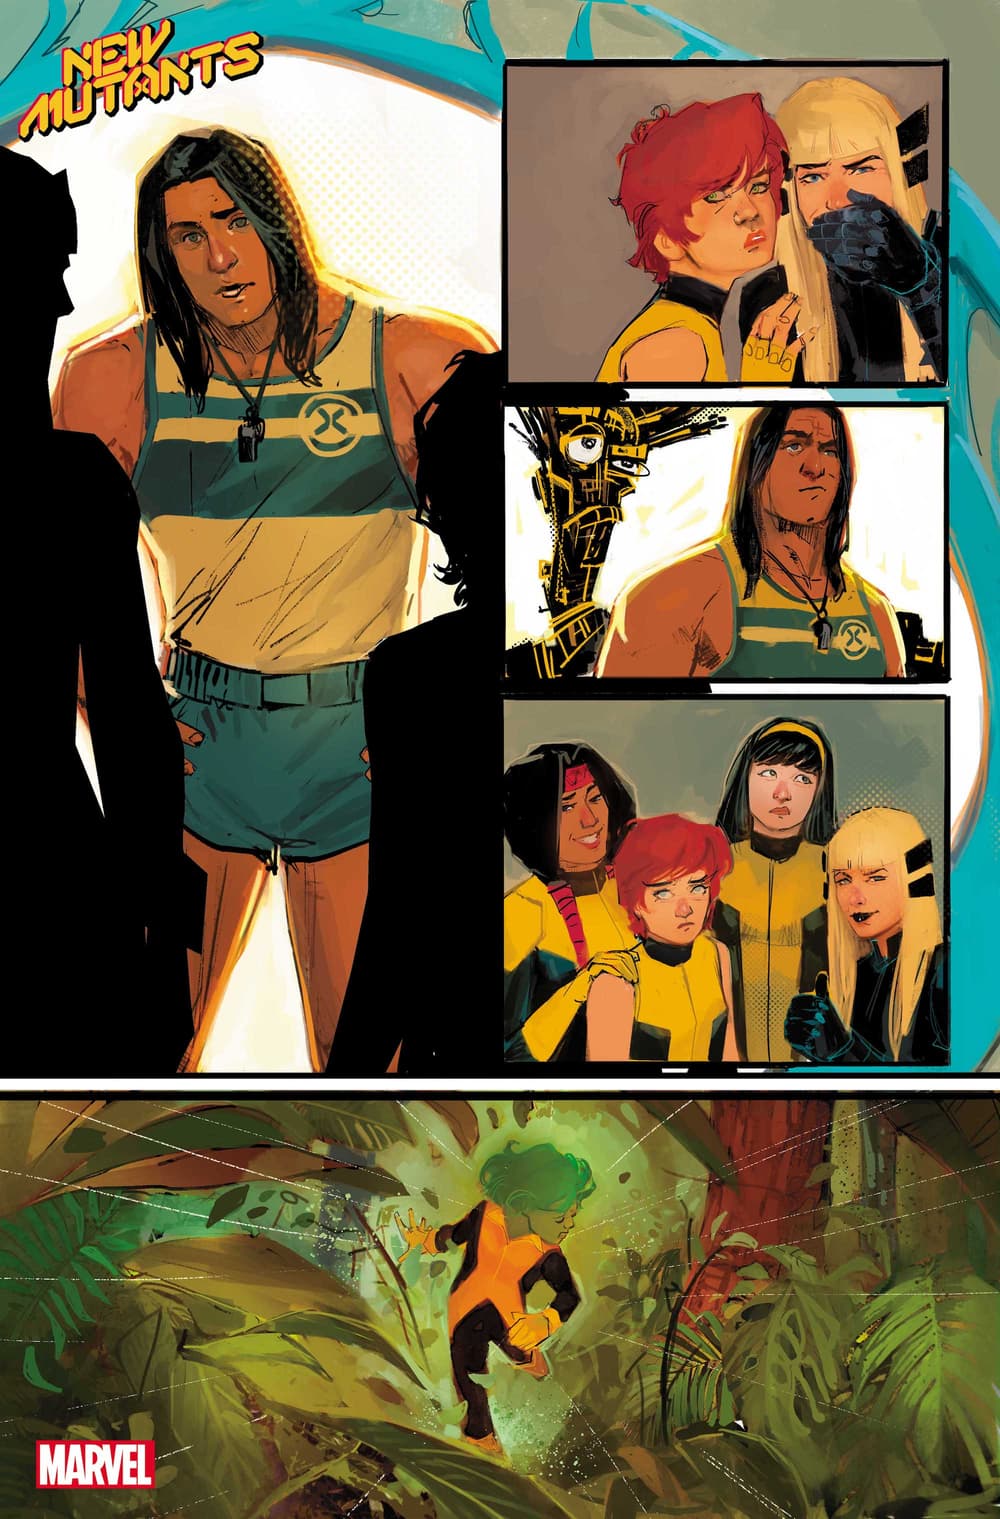 NEW MUTANTS #14 preview art by Rod Reis